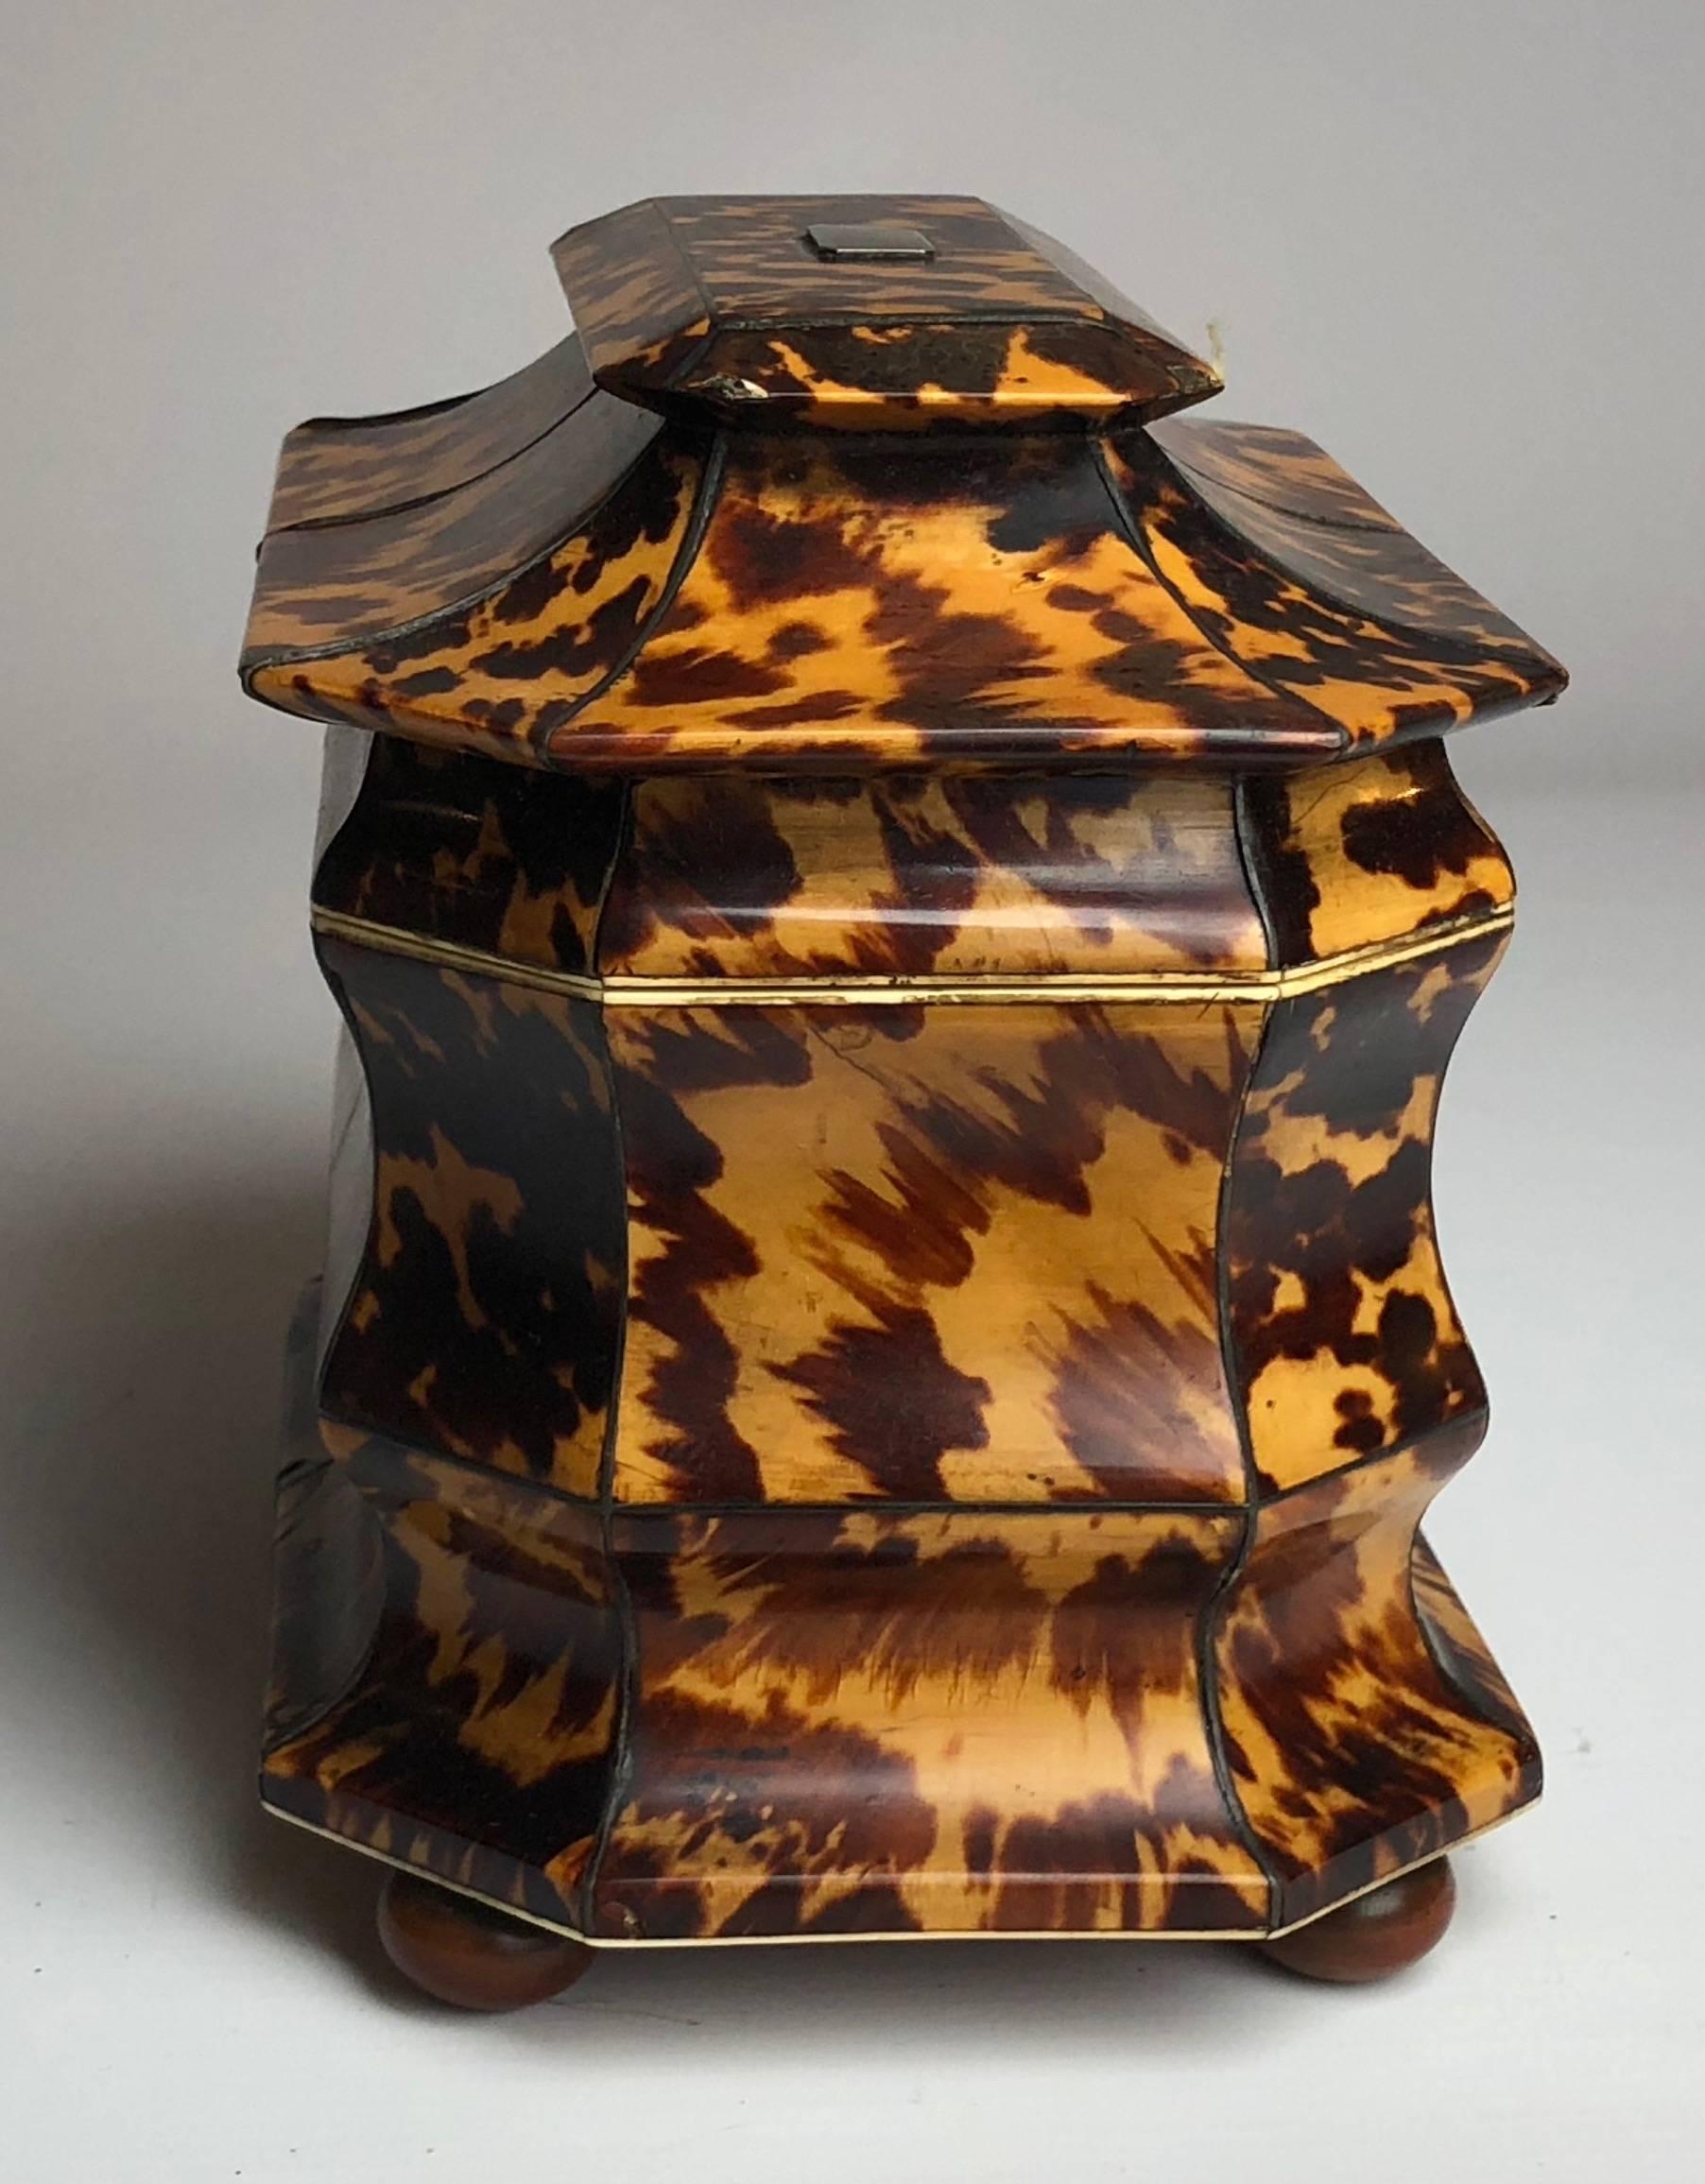 An excellent and rare Regency Tortoiseshell Tea Caddy

ENGLISH Circa 1820

The caddy measures 7" wide by 4" deep by 6" high

Important information below. 

If you are purchasing Tortoiseshell or Ivory pieces and are outside the E.U.